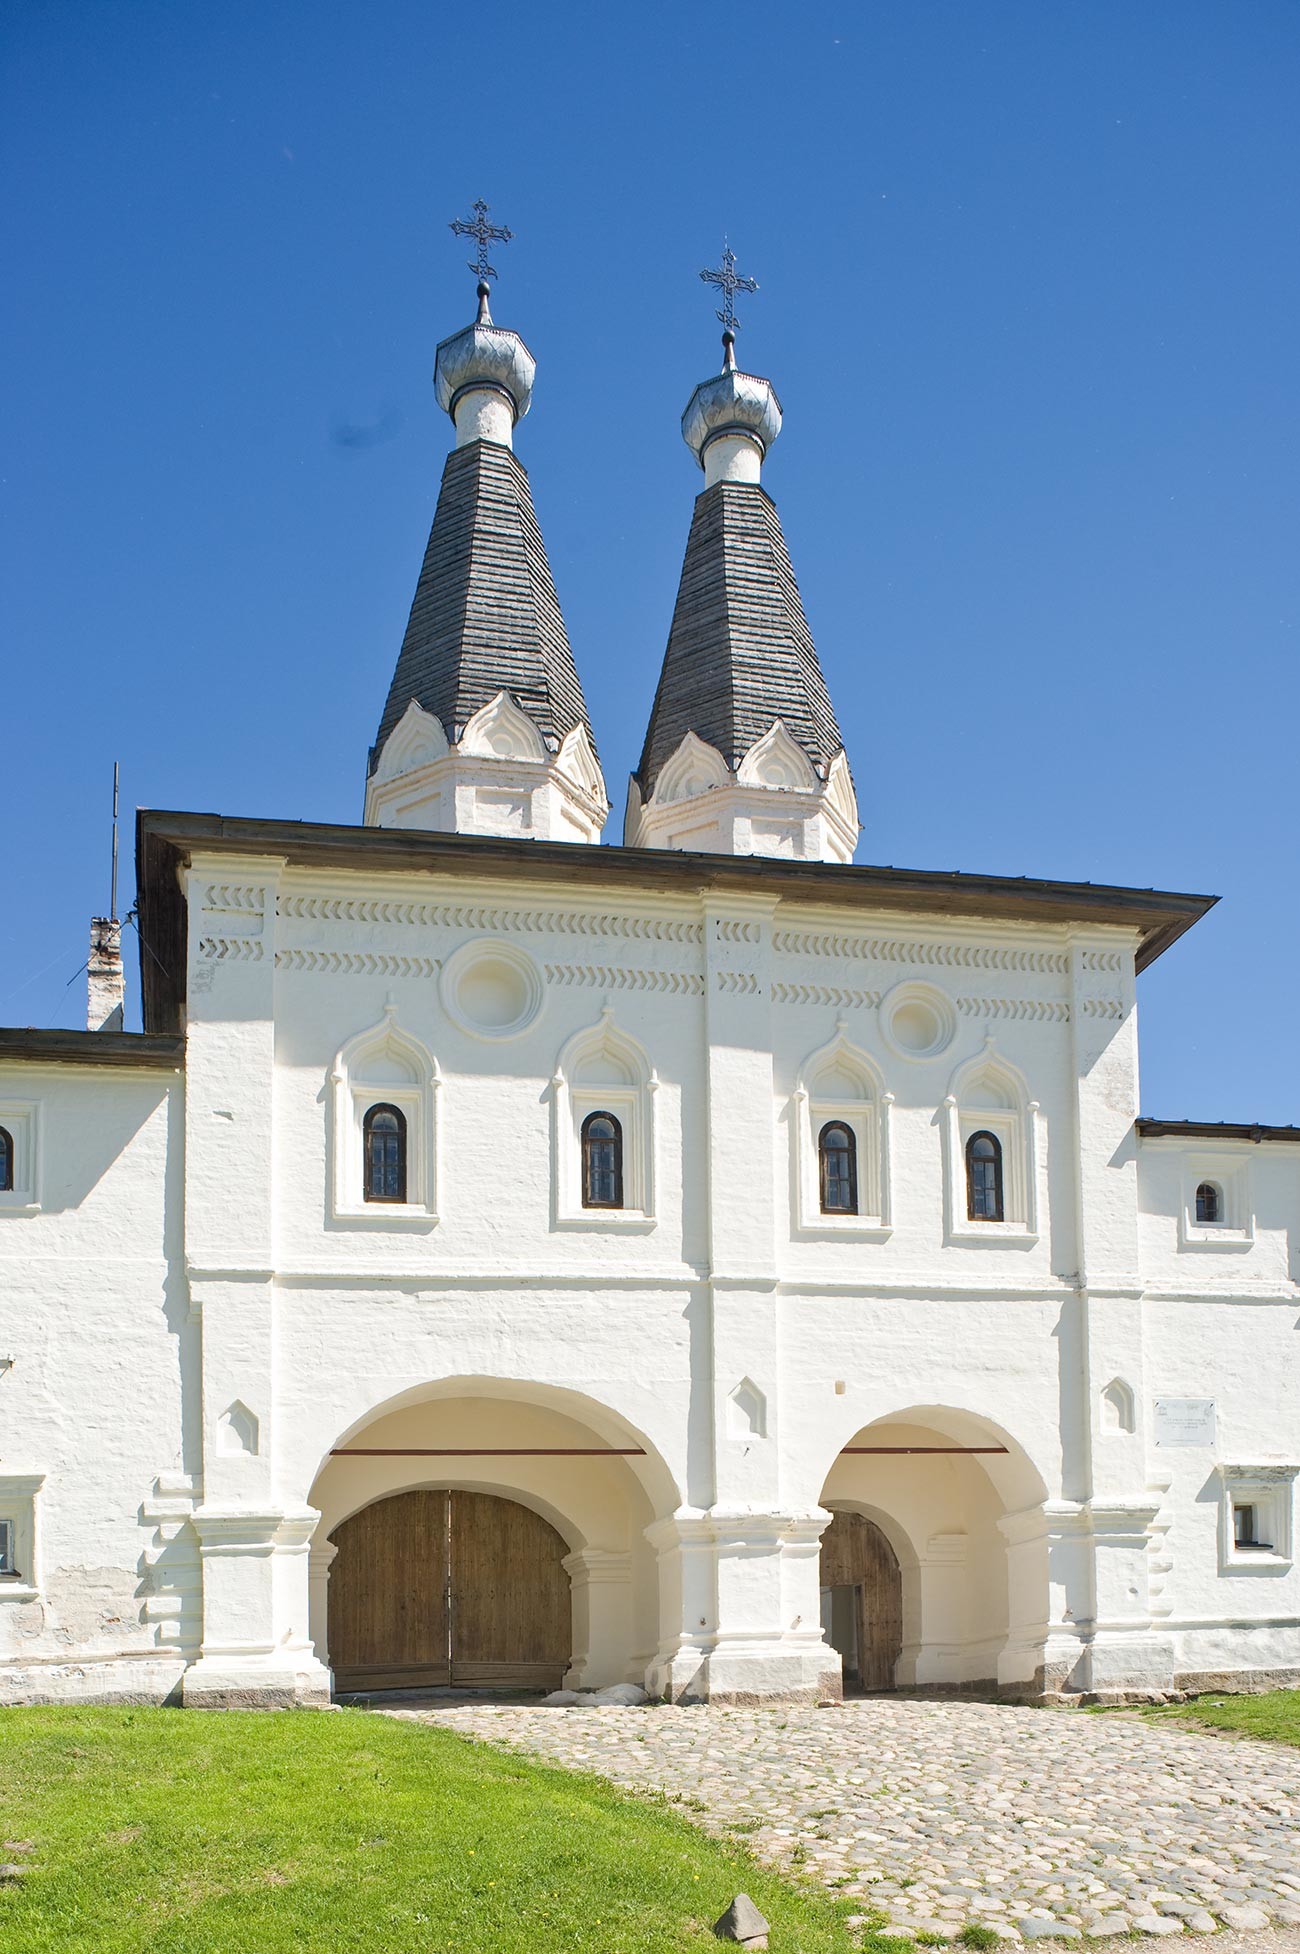 Ferapontov Monastery. Holy Gate with Churches of Epiphany & St. Ferapont. West view. June 1, 2014